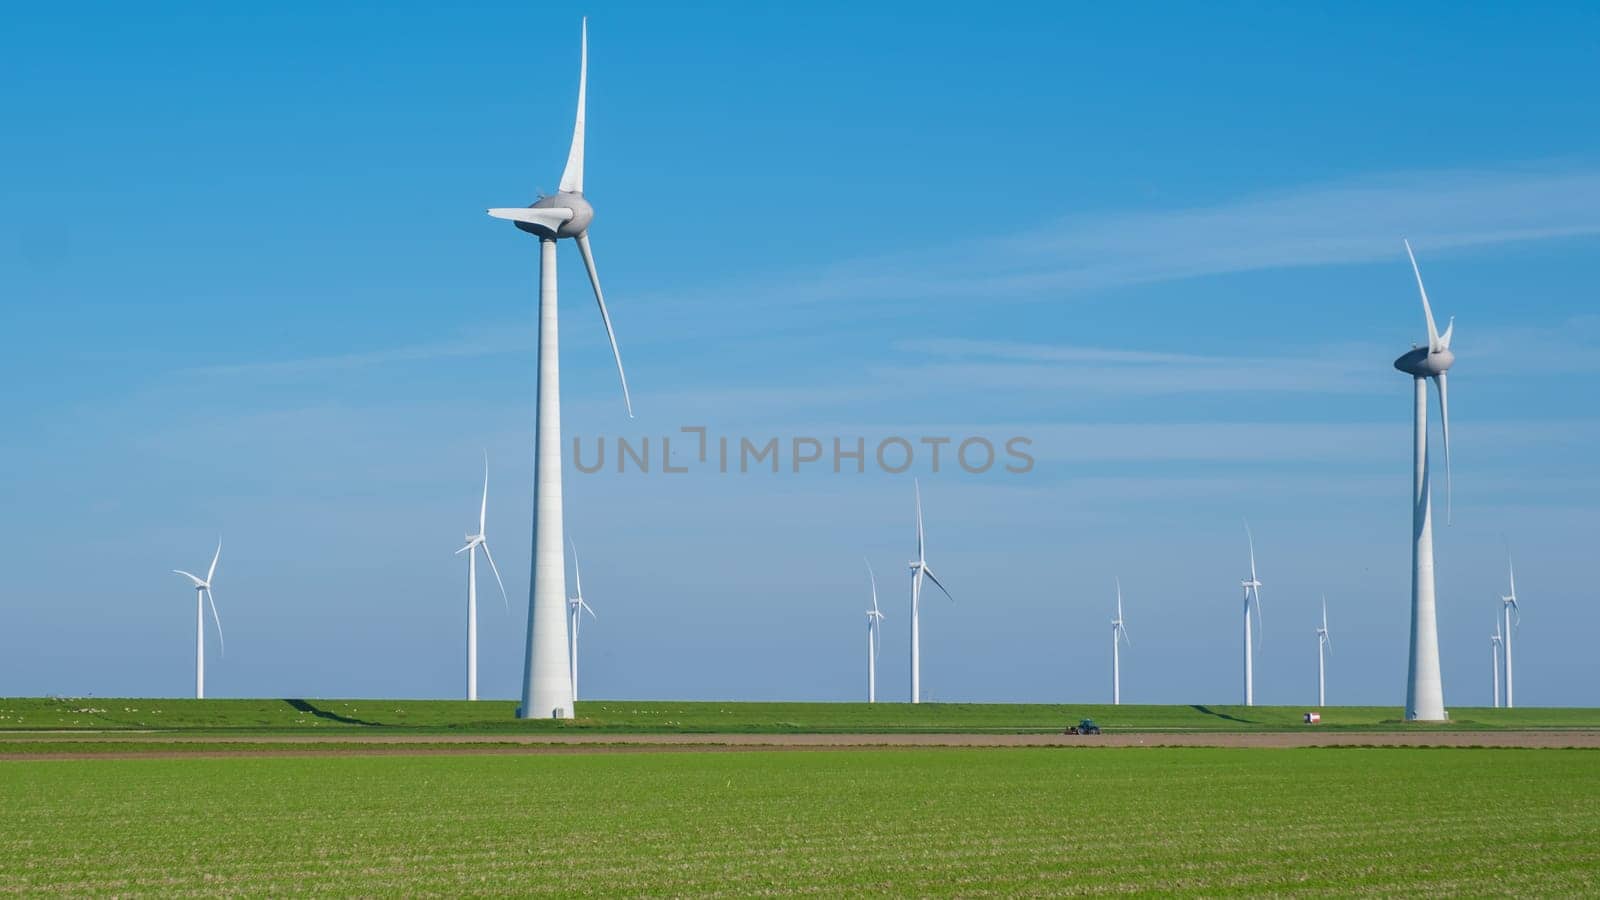 A serene field of vibrant green grass stretches out before us, dotted with a collection of majestic windmills spinning gracefully in the background by fokkebok